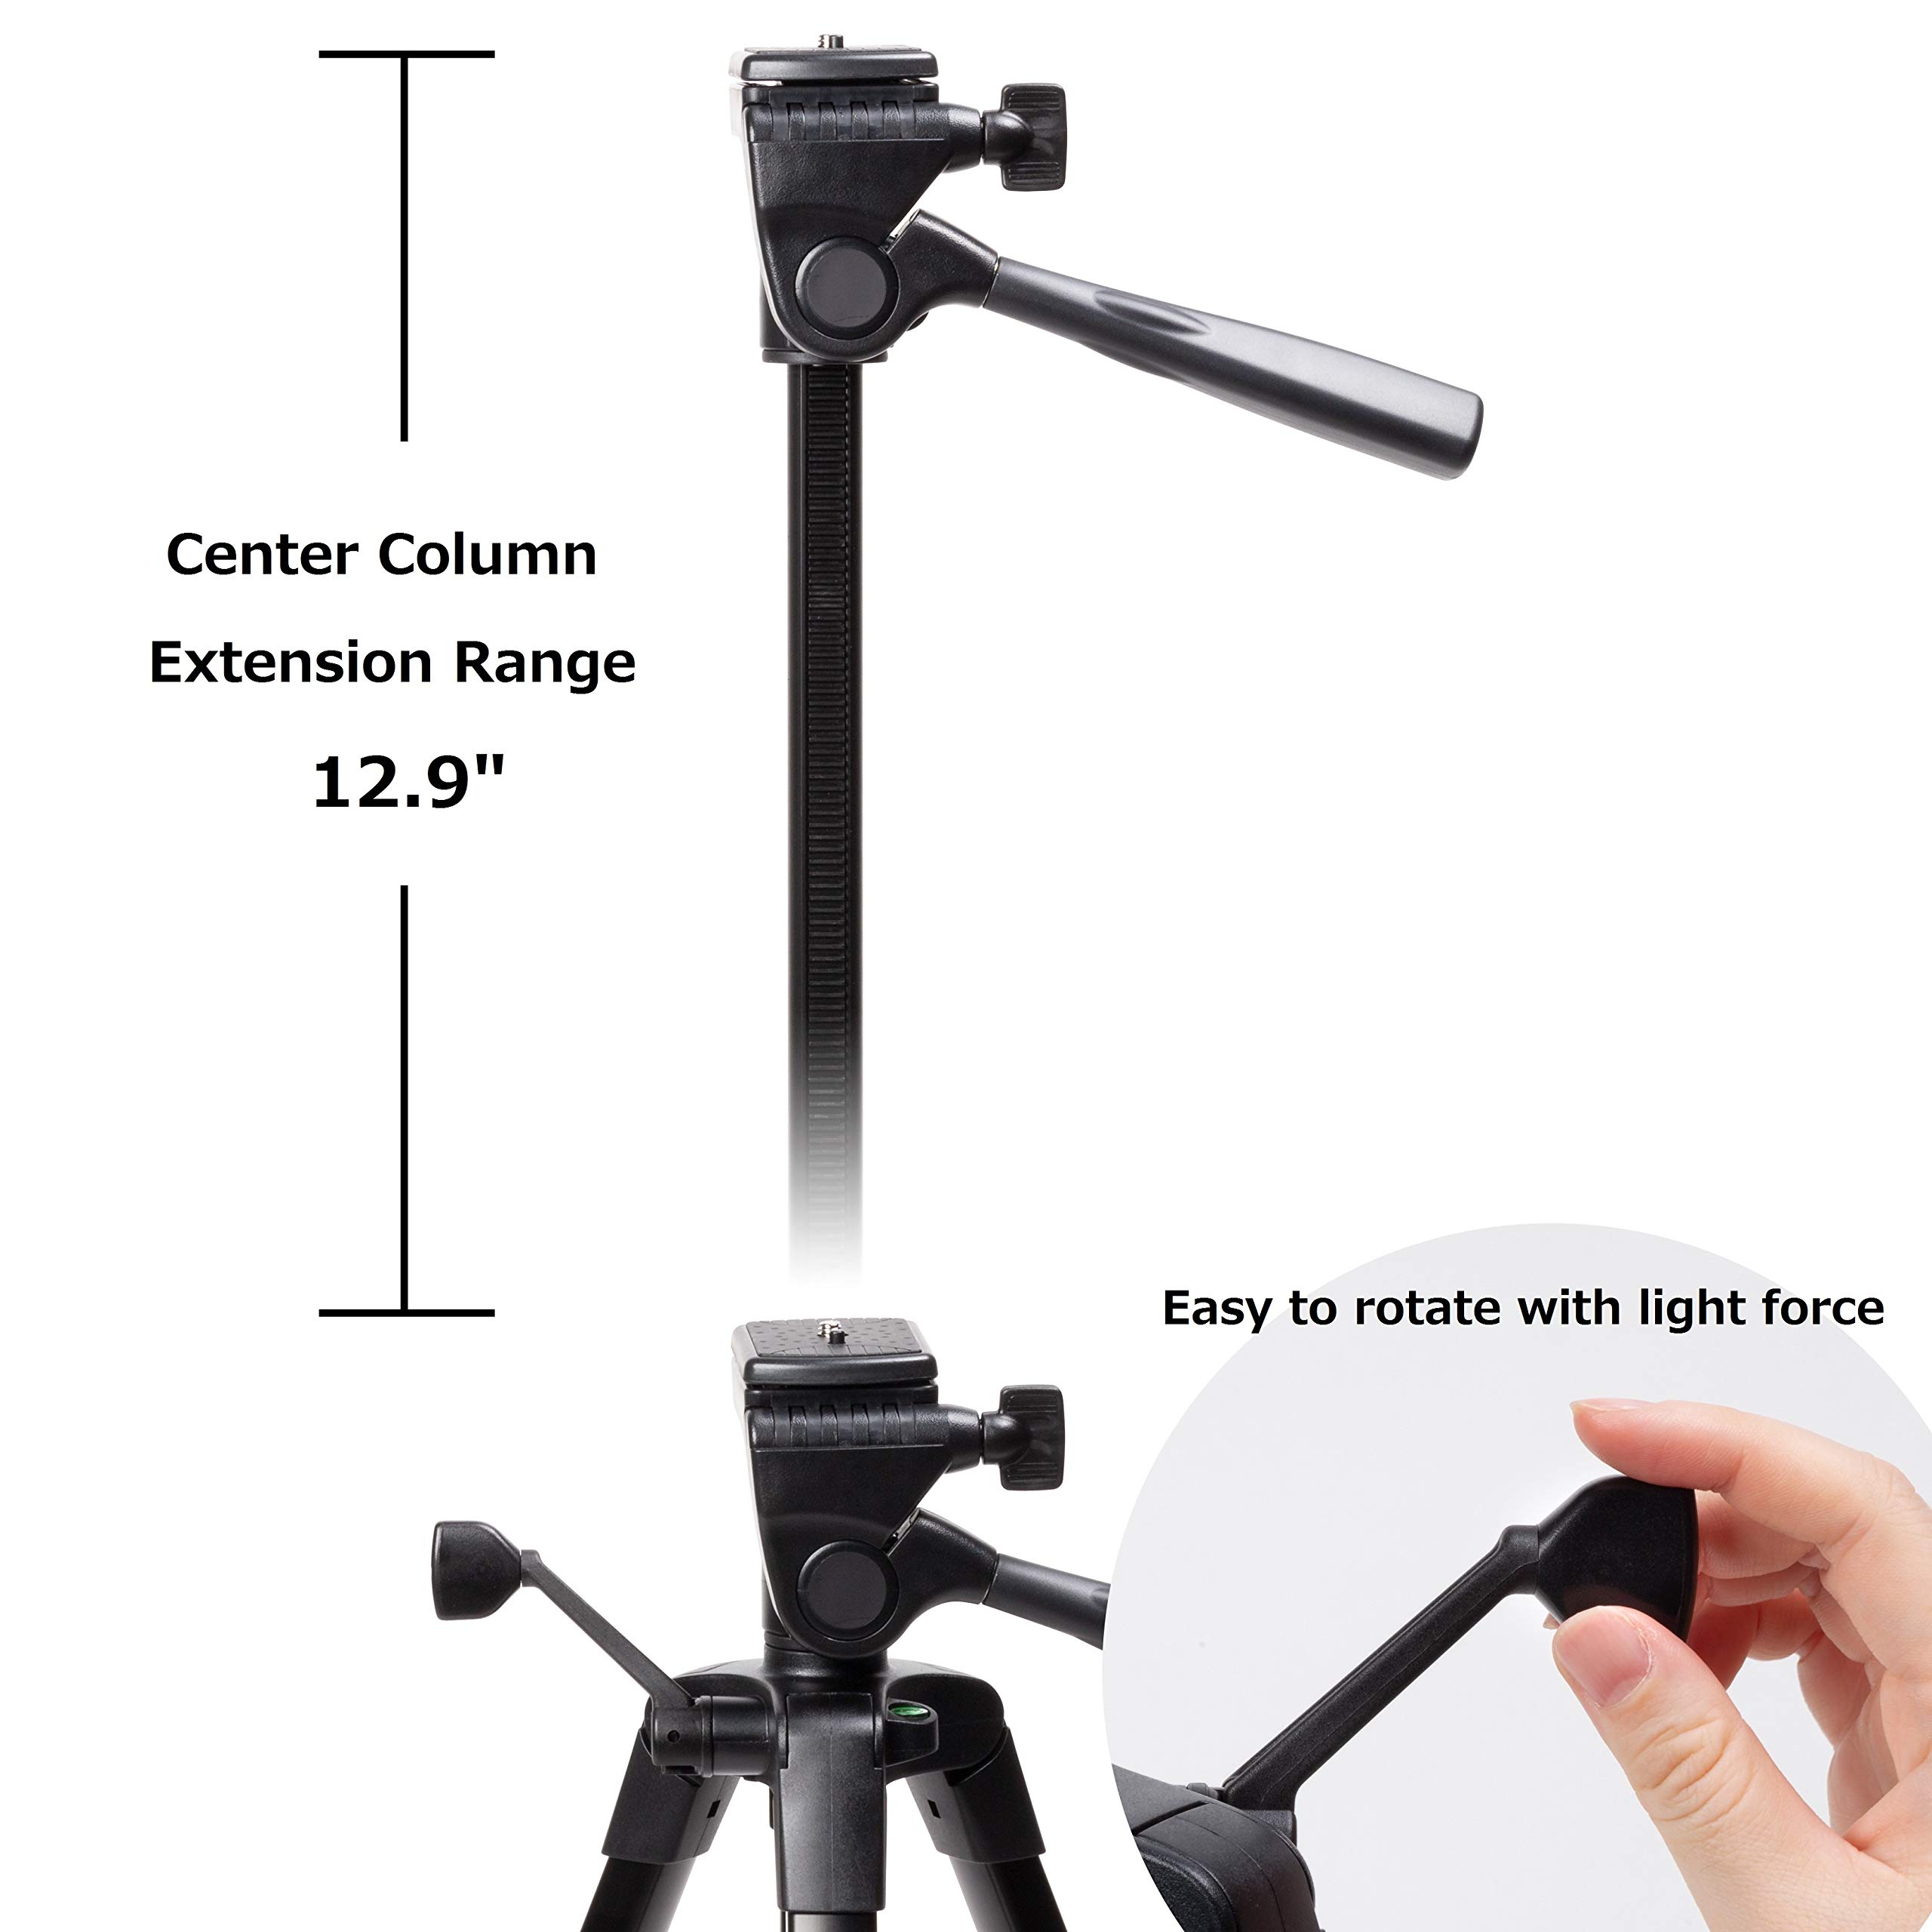 SLIK U883 3-Stage Compact Lightweight Folding Aluminum Travel Portable DSLR/SLR Video/Camera Tripod with 3-Way Pan Head for Canon Nikon Sony Cameras with Carry Case - Black (612-686)